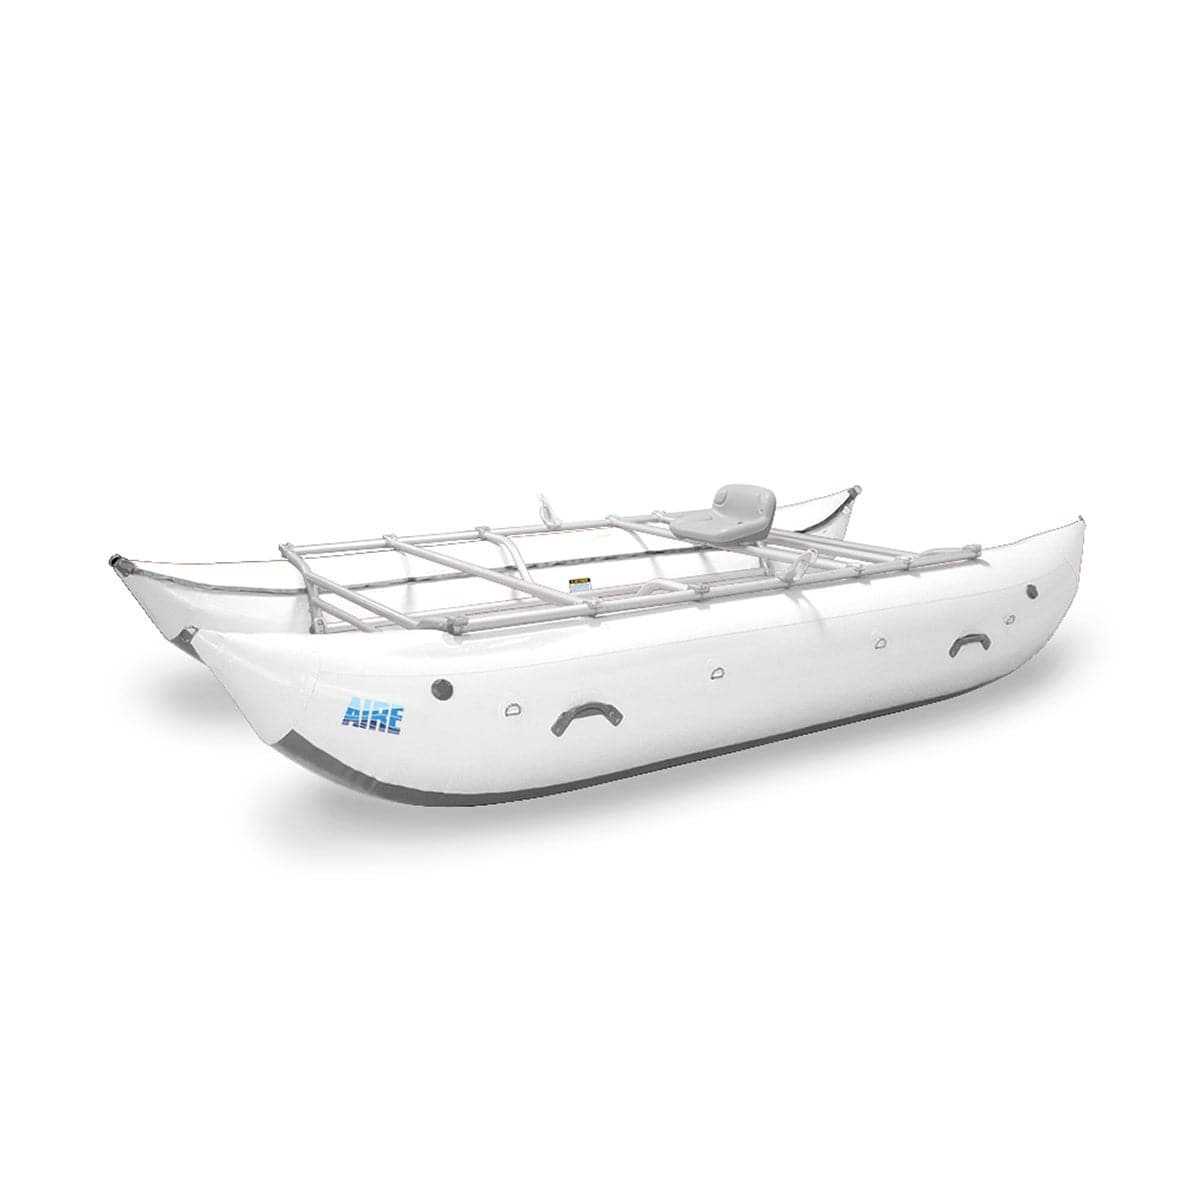 Featuring the Lion Cataraft cataraft manufactured by AIRE shown here from a tenth angle.